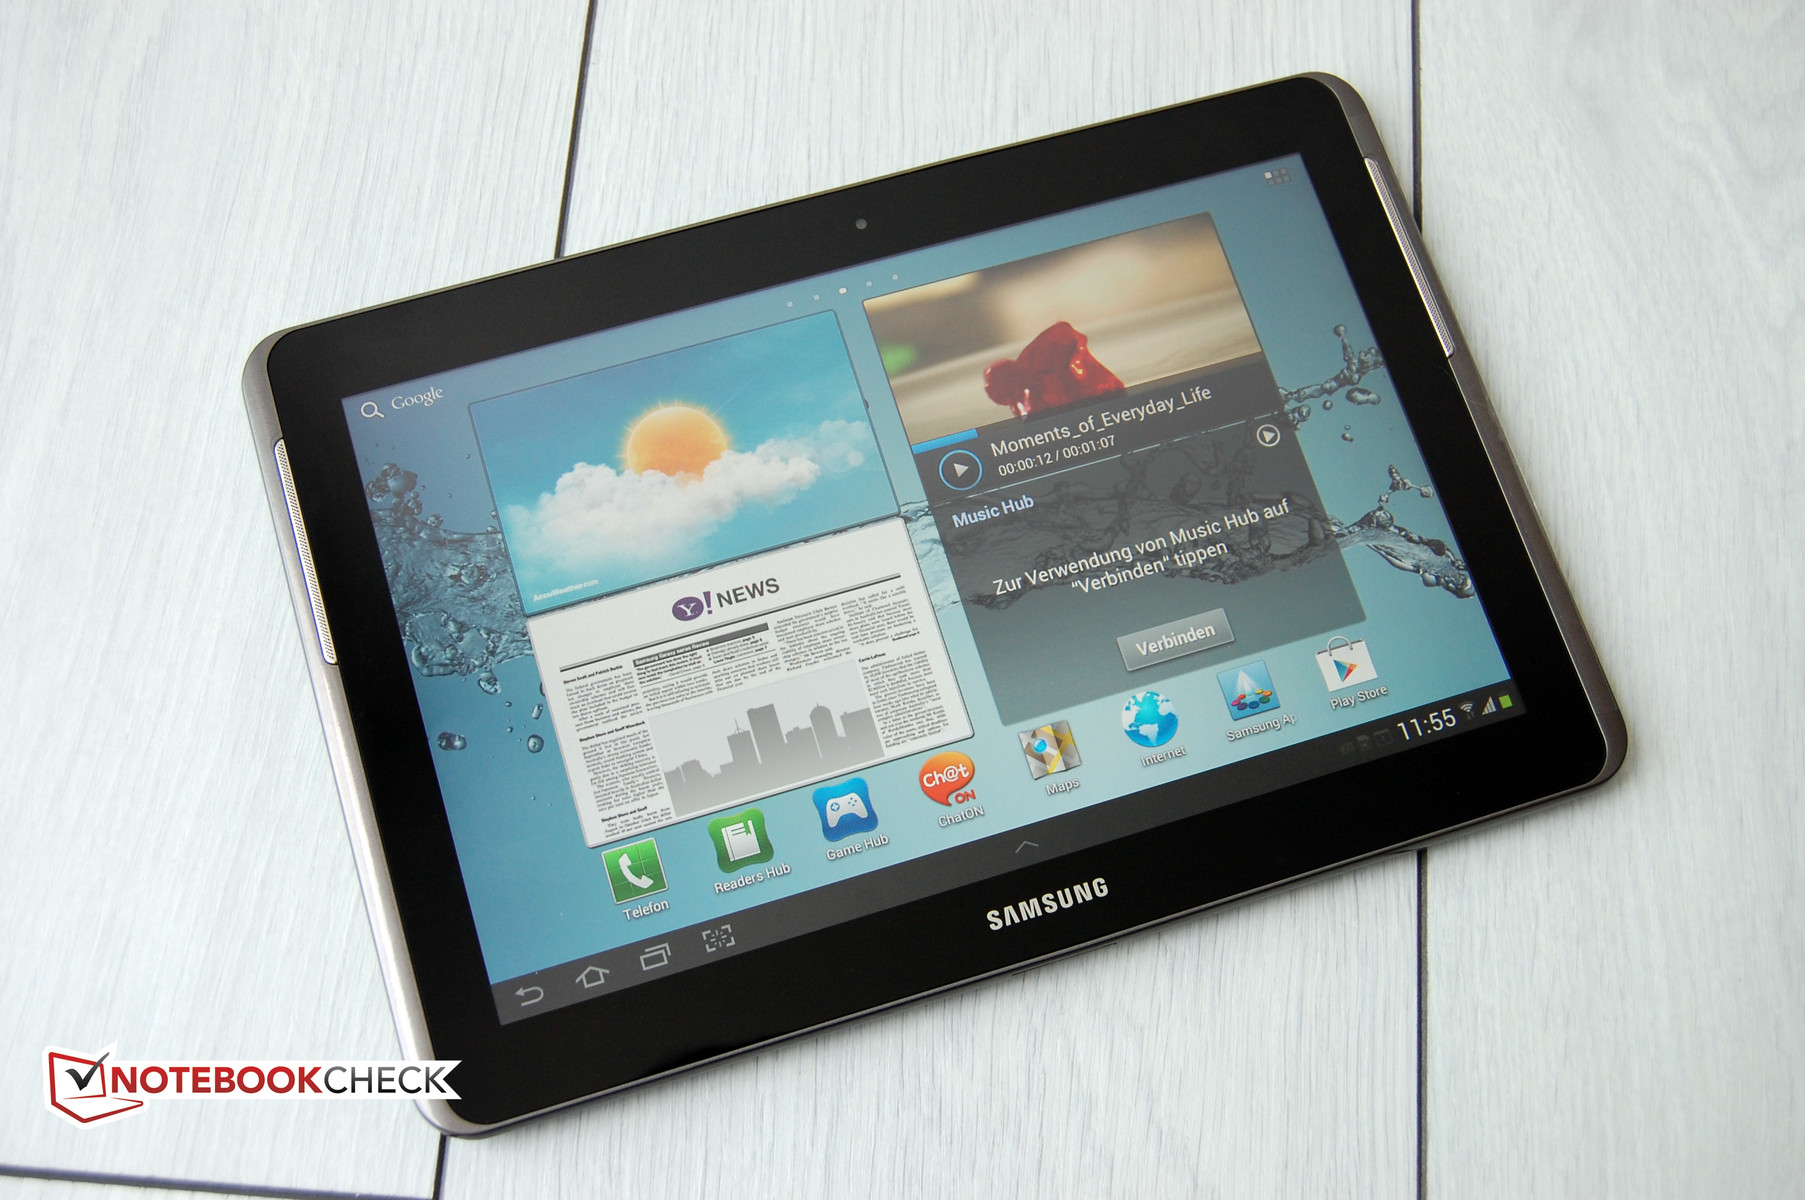 Review 10.1" Galaxy Tab Tablet/MID - NotebookCheck.net Reviews